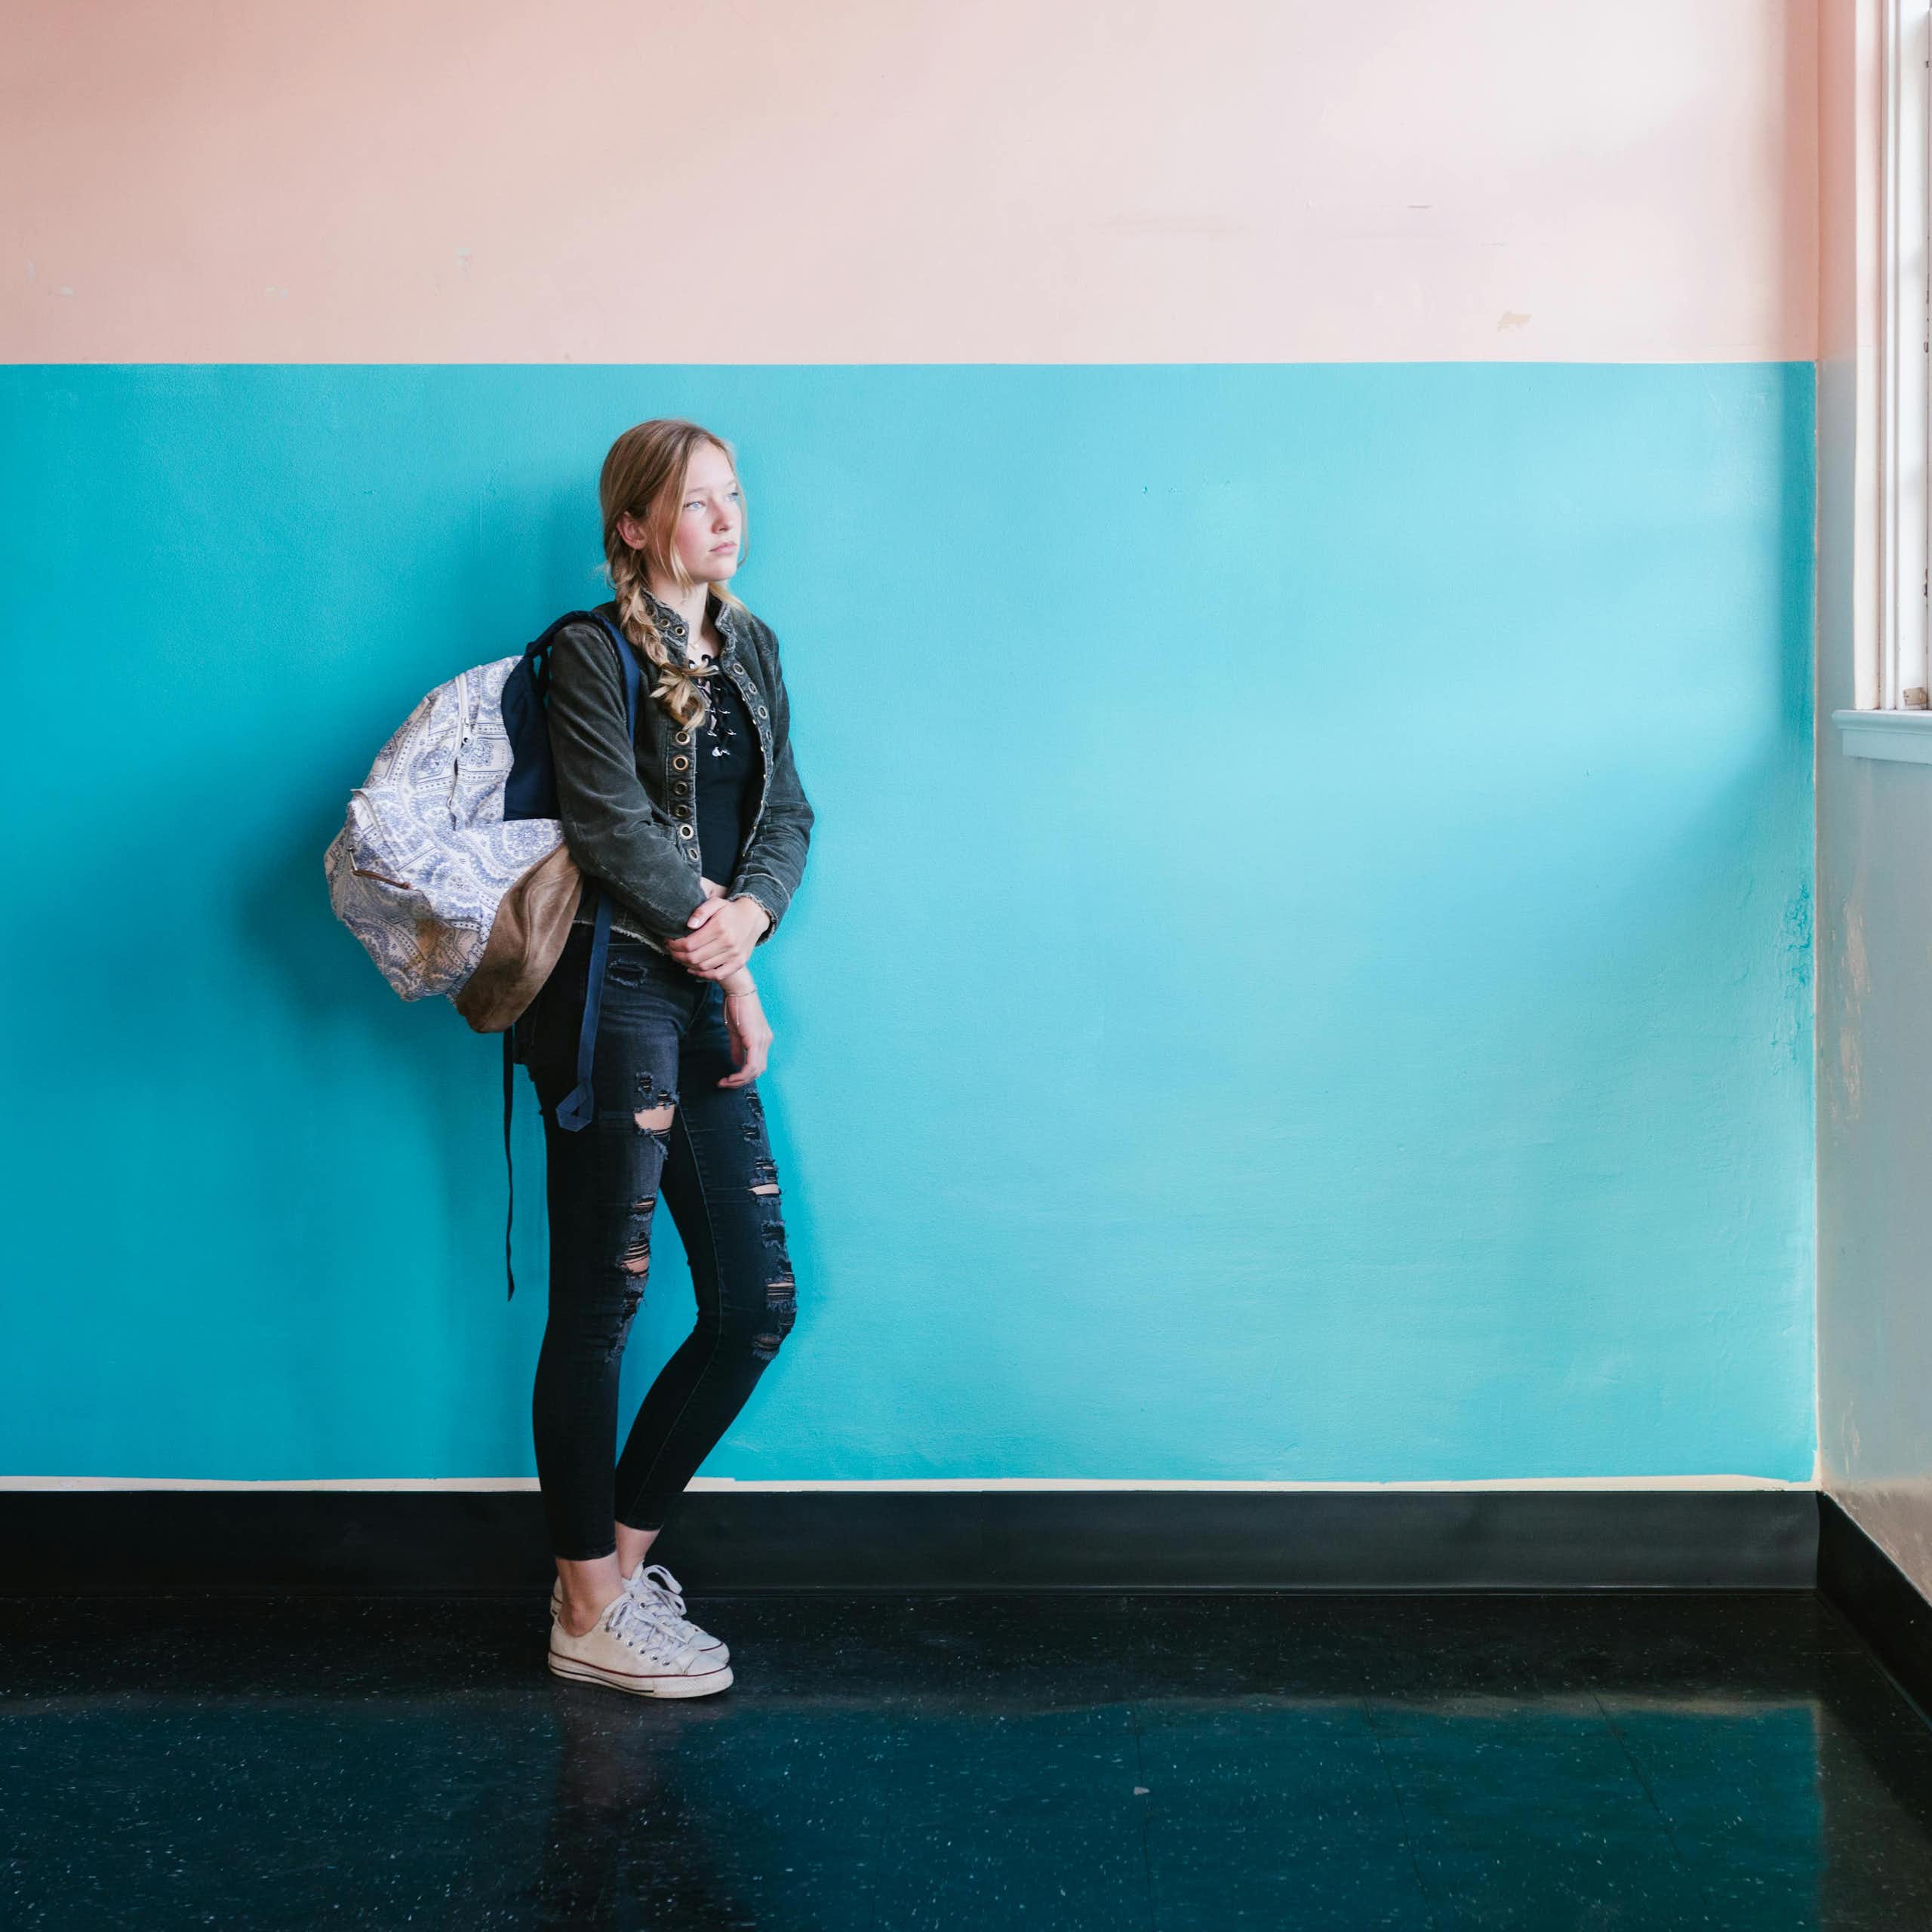 A young woman in jeans and a backpack leans against a blue and pink painted wall. She looks out of a large window. 